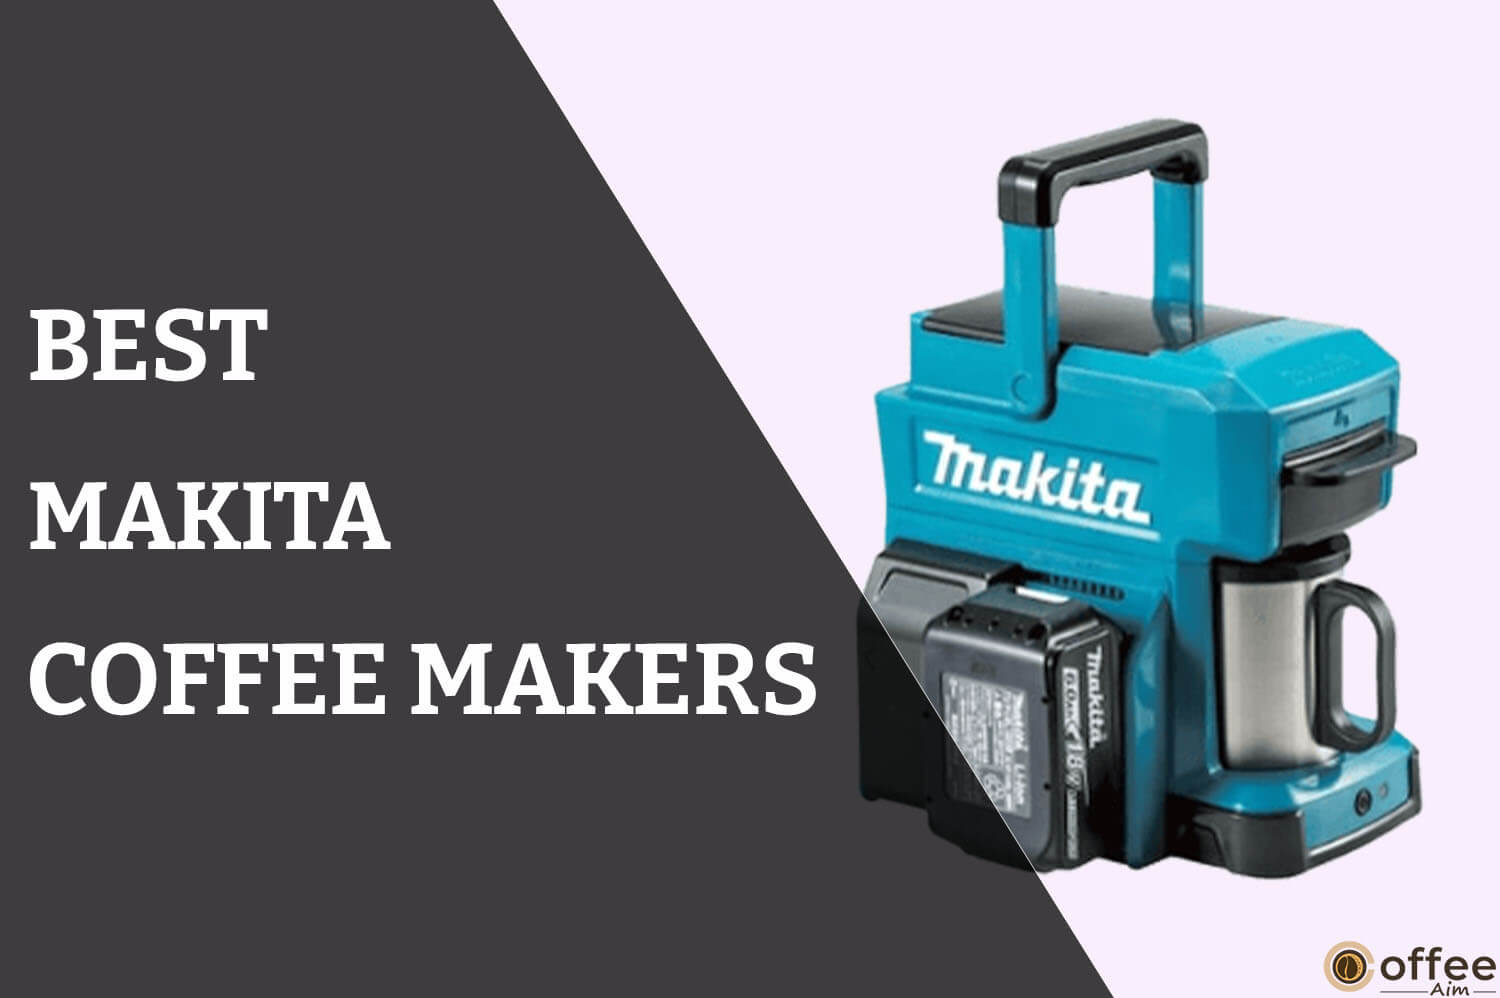 Feature image for an article "Best Makita Coffee Maker Review"